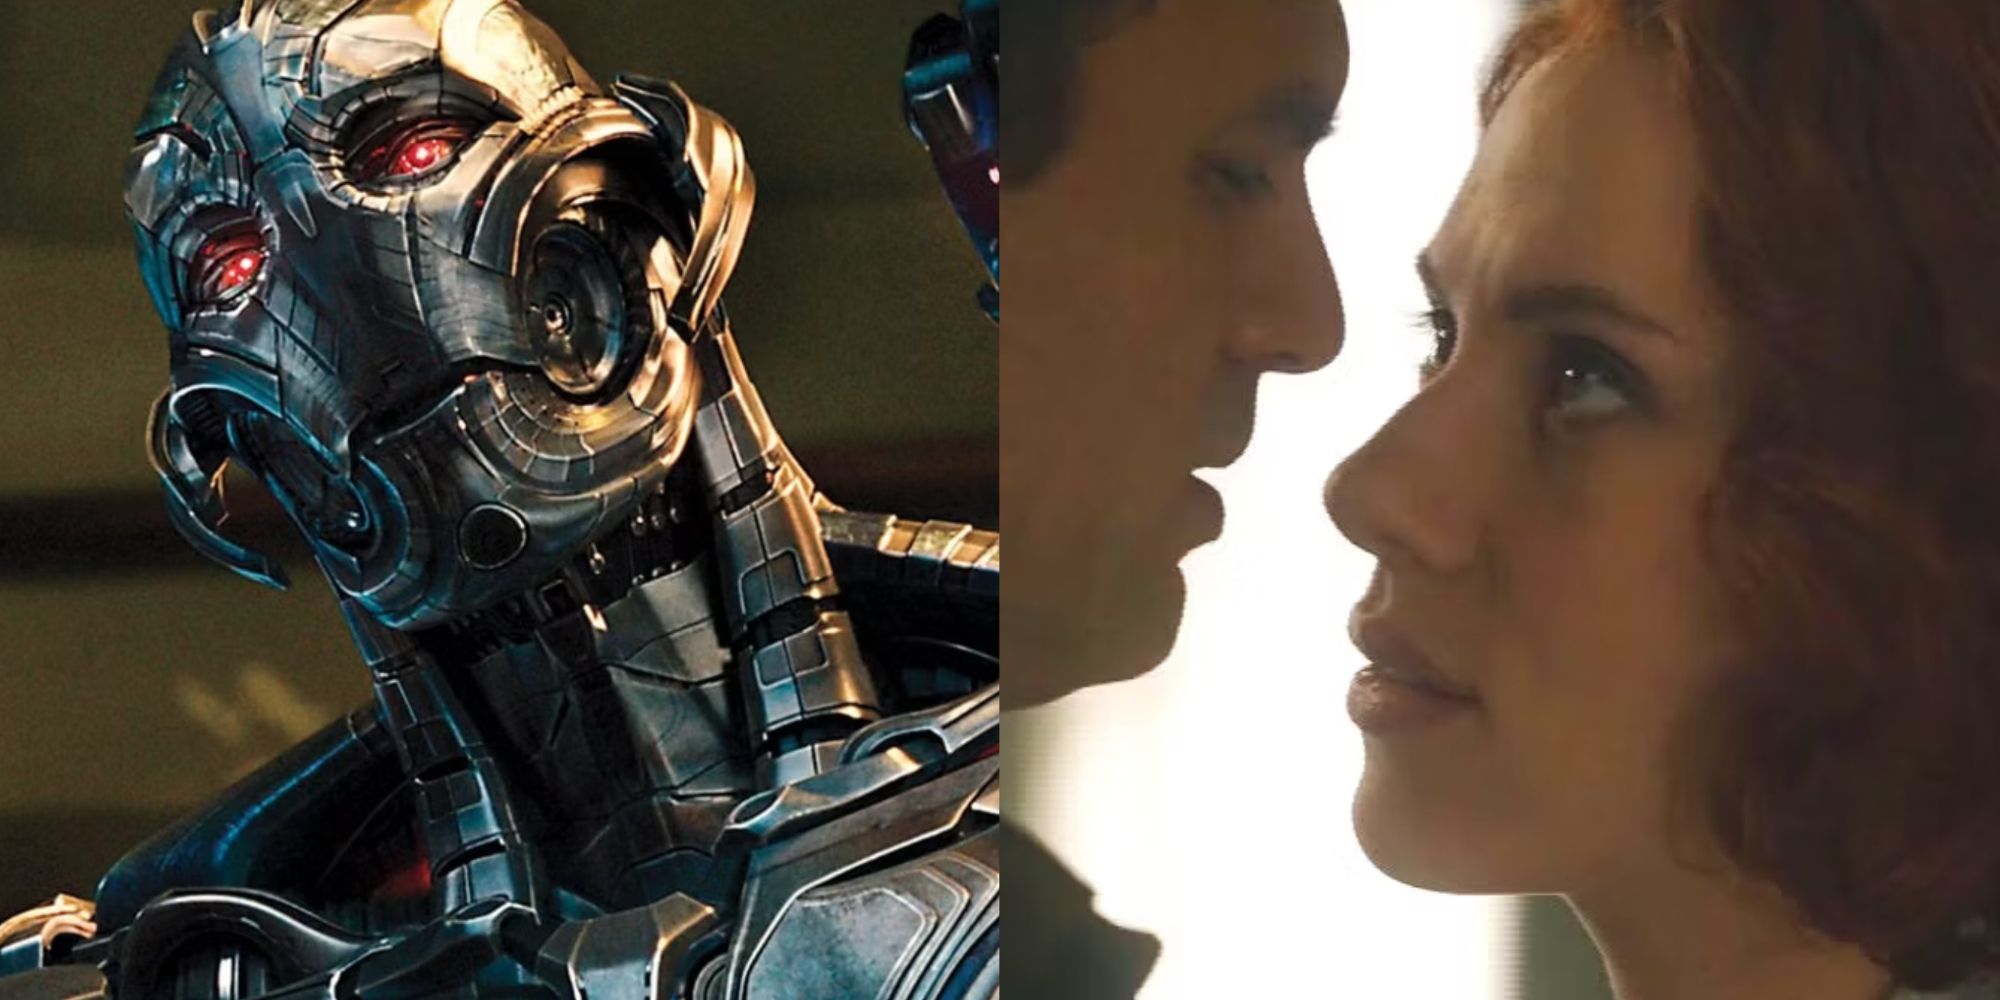 Split image of Ultron and Natasha Romanoff with Bruce Banner in Avengers: Age of Ultron